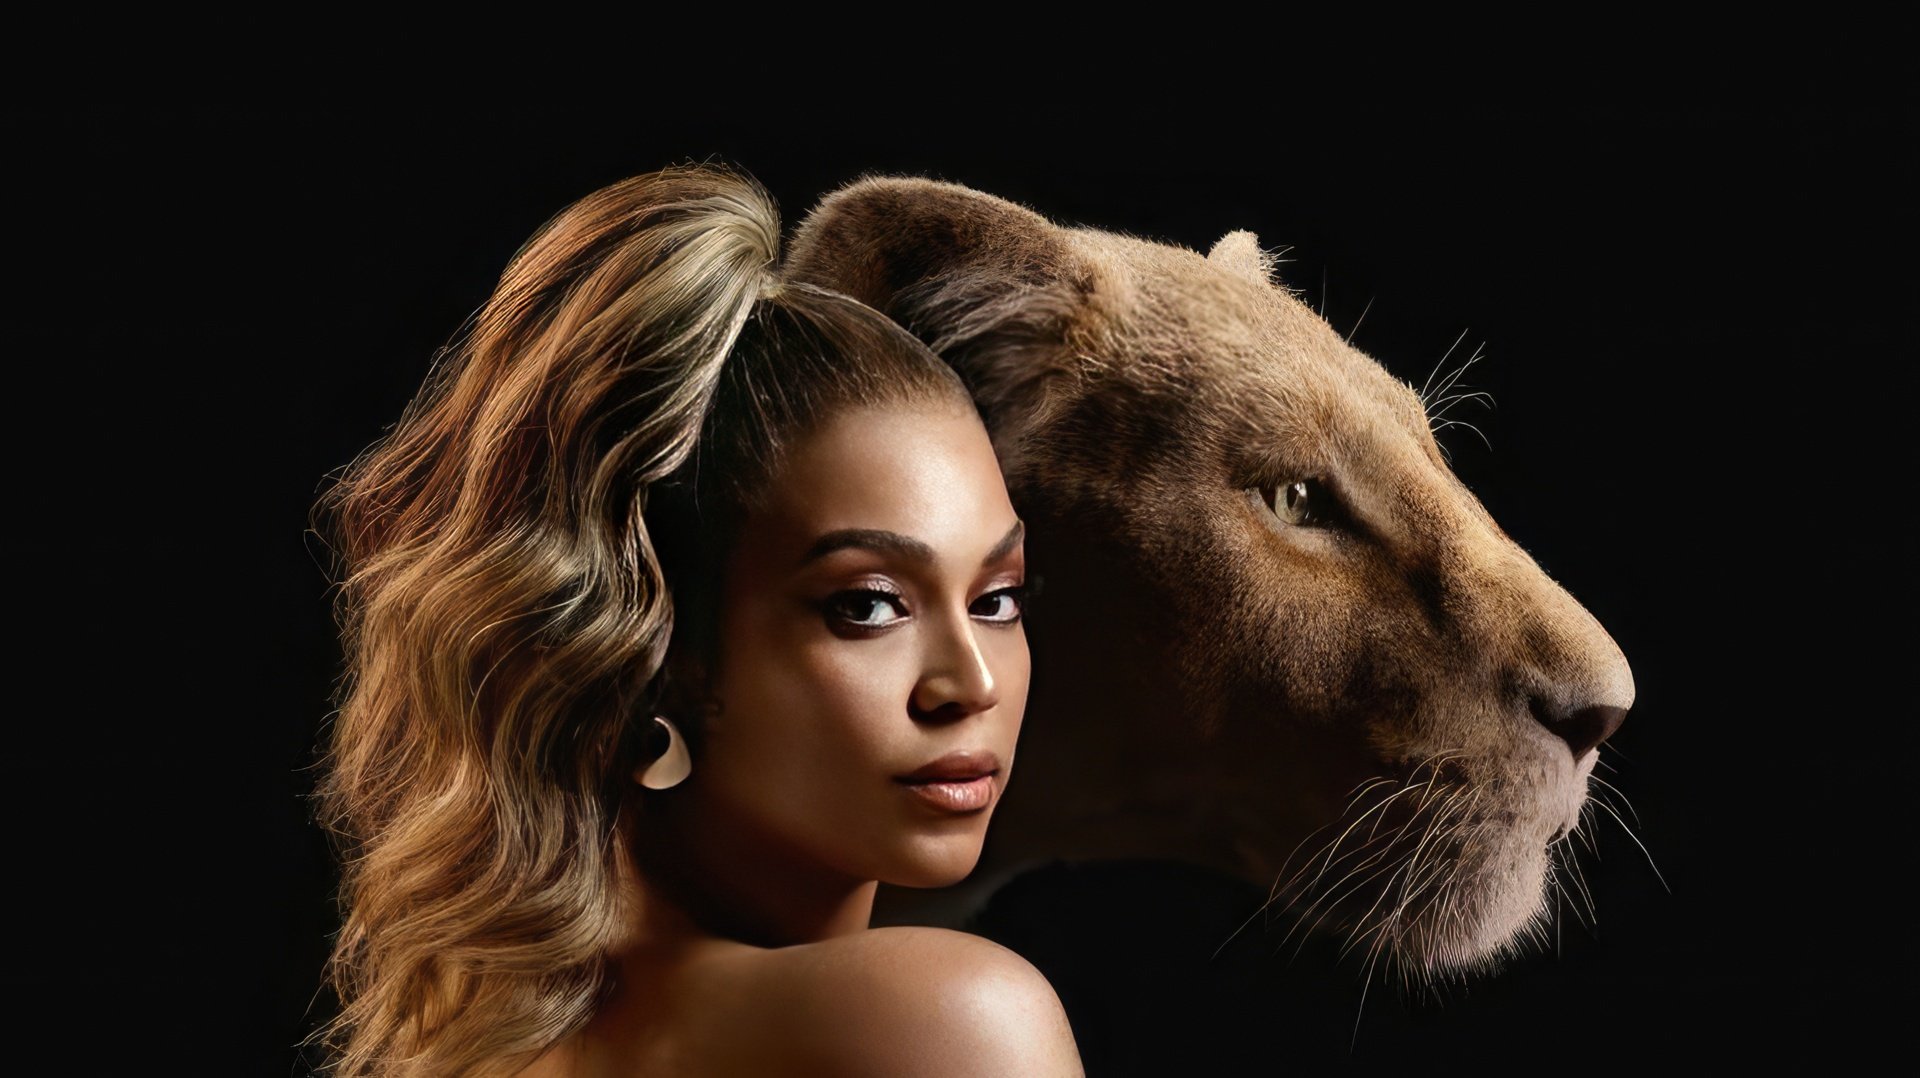 Beyonce voiced Nala from the new Lion King